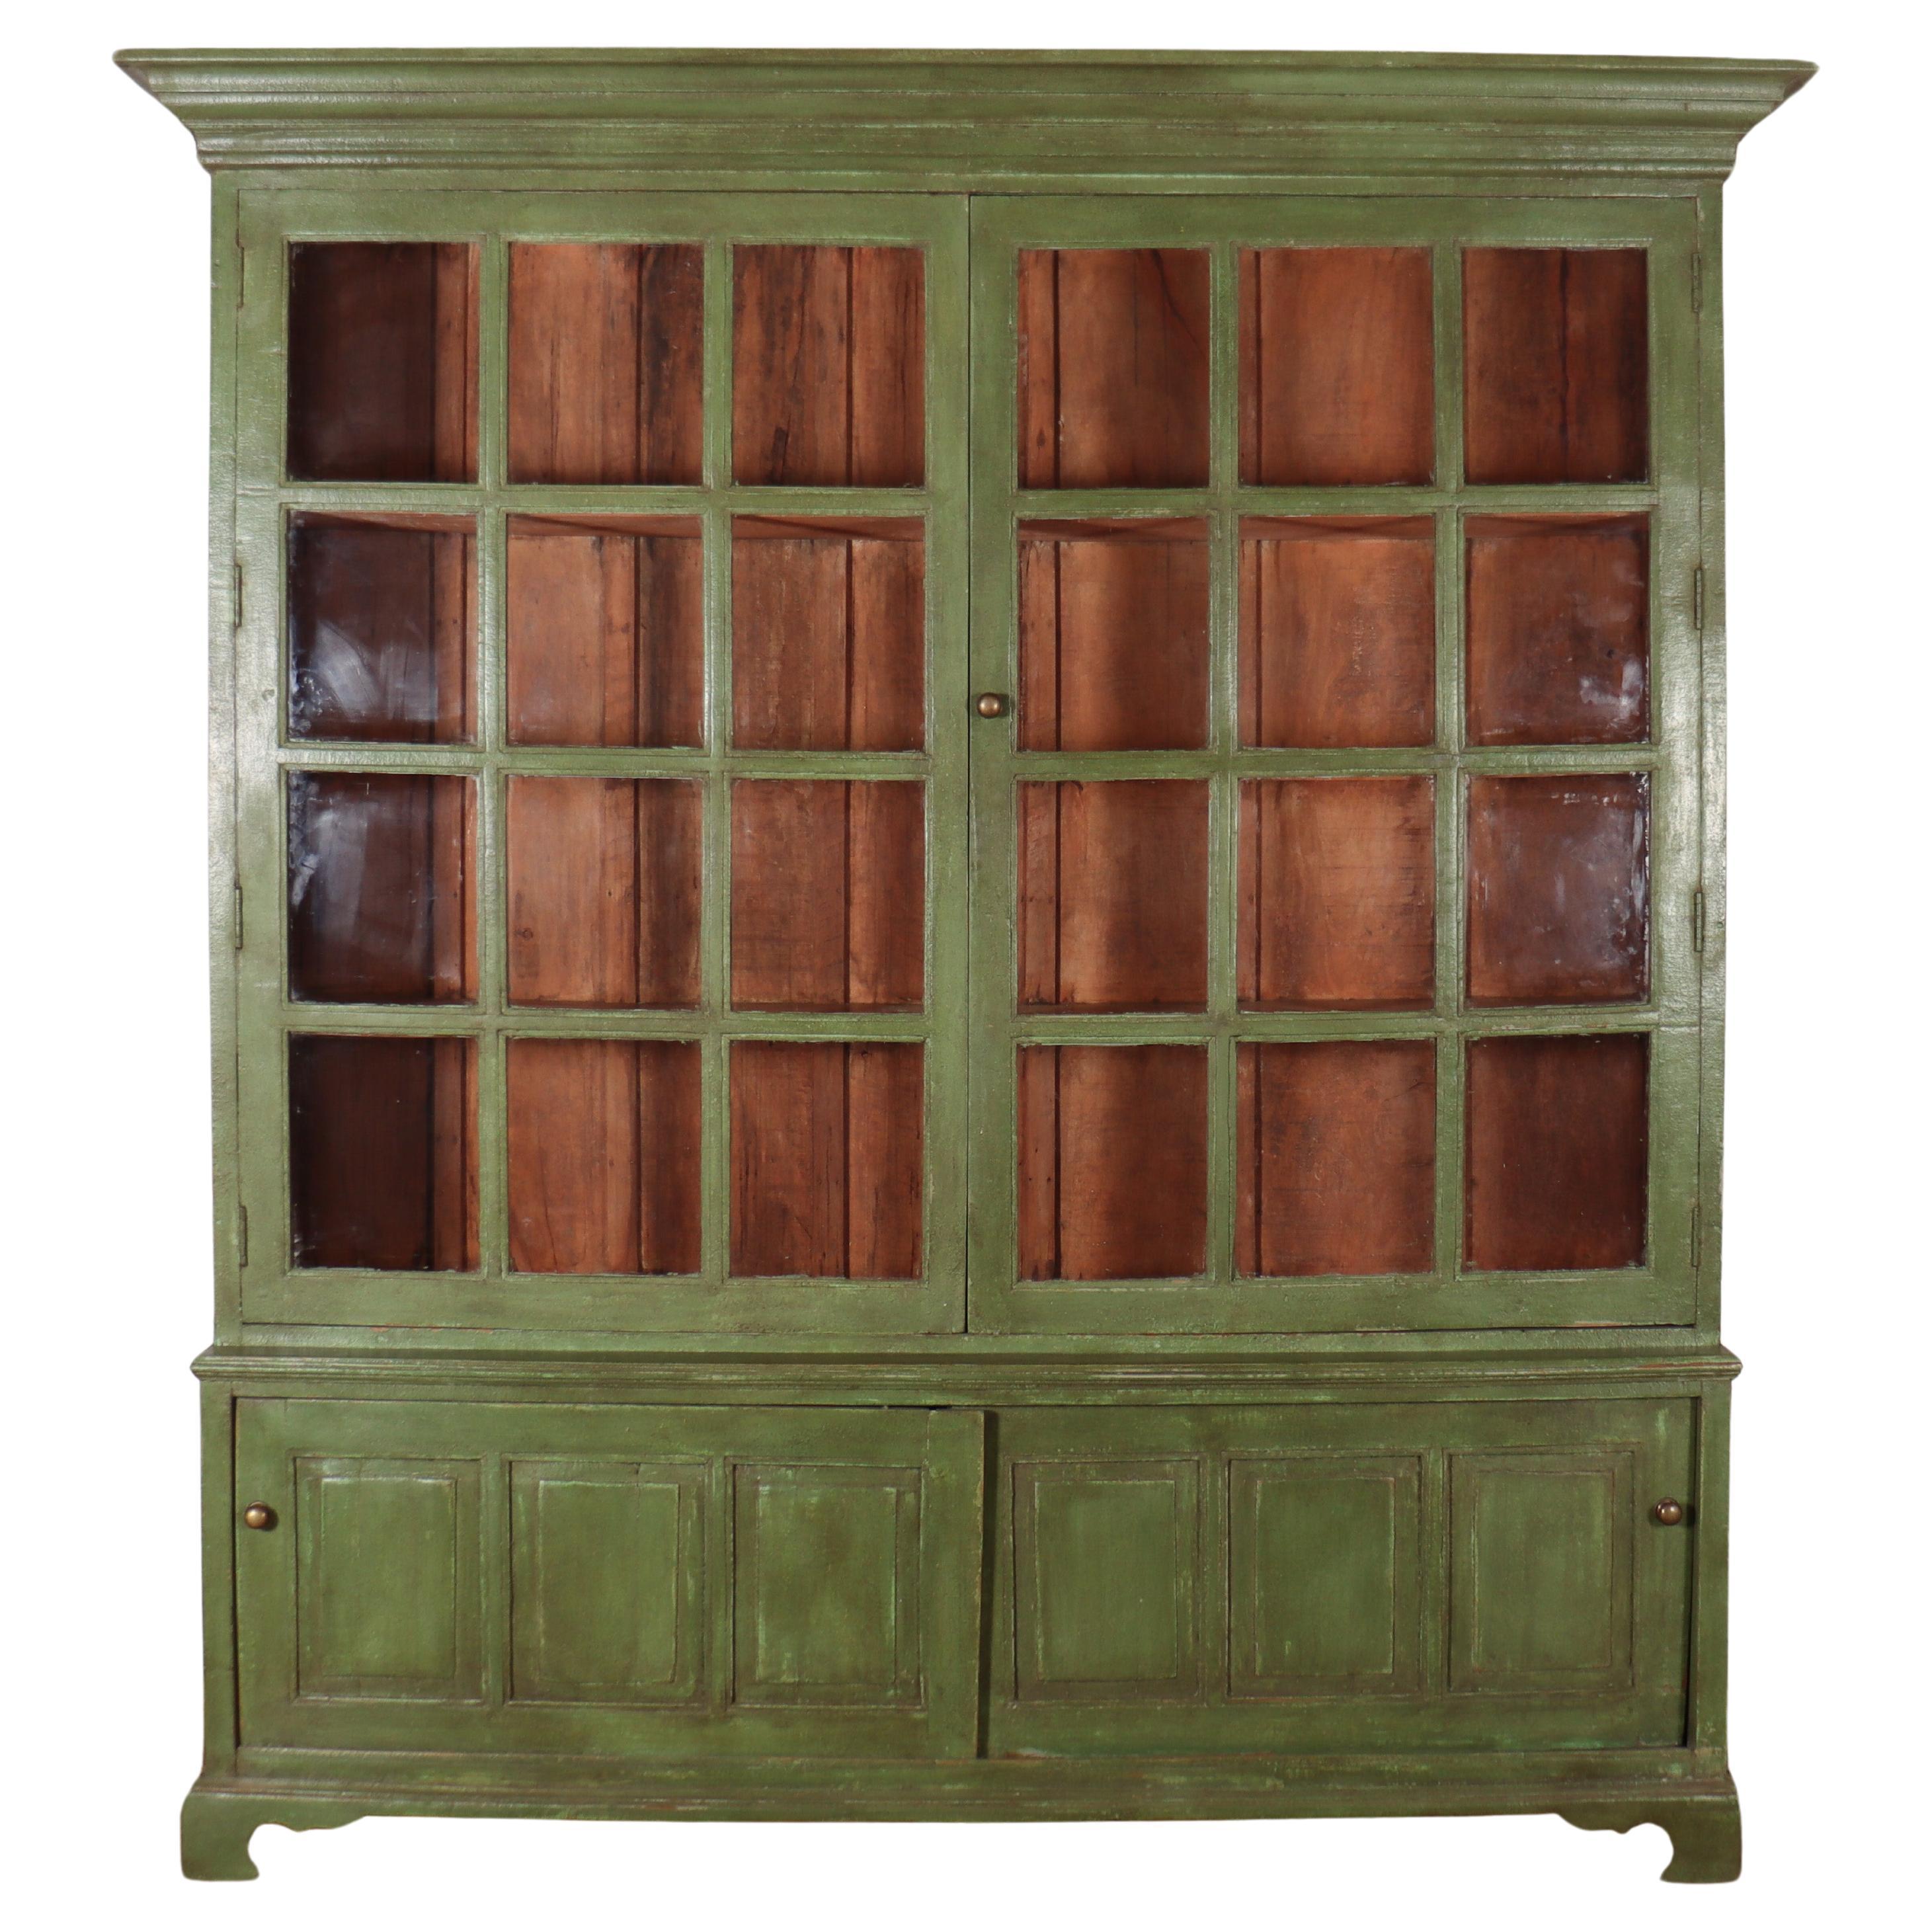 Dutch Painted Kitchen Cabinet For Sale